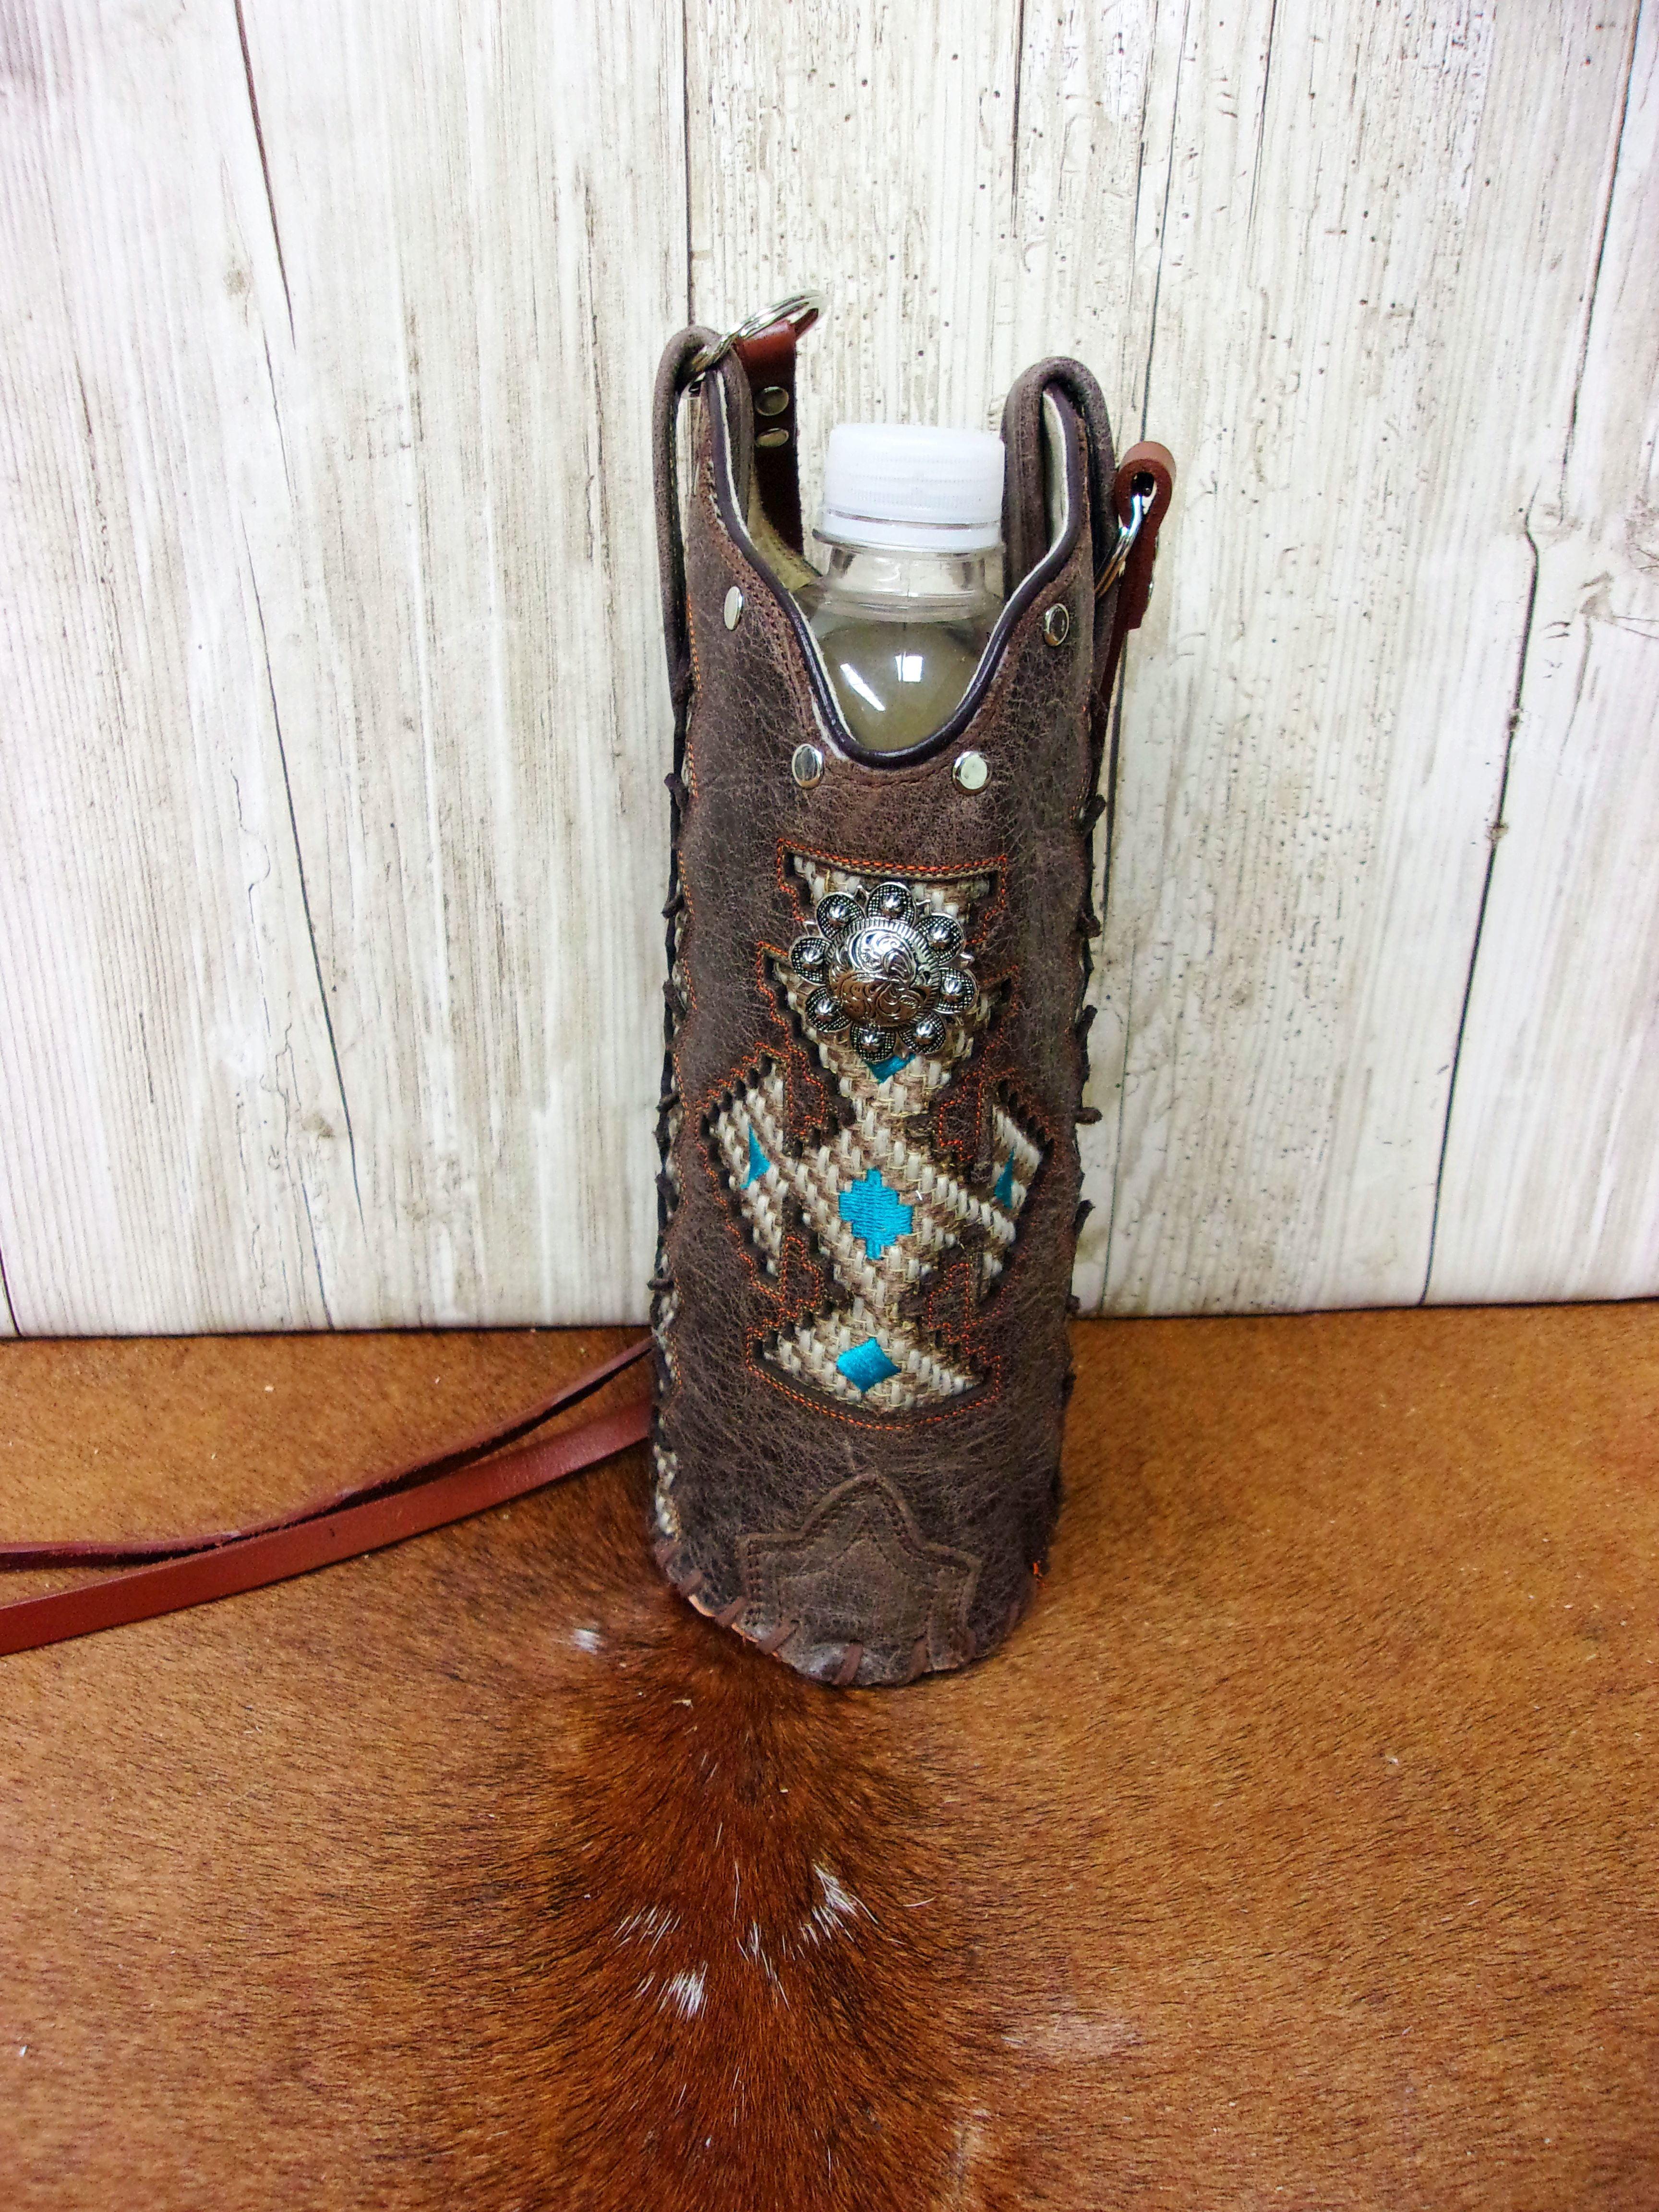 Cowboy Boot Water Bottle Tote - Bottle Caddy - Leather Bottle Holder WA25 cowboy boot purses, western fringe purse, handmade leather purses, boot purse, handmade western purse, custom leather handbags Chris Thompson Bags